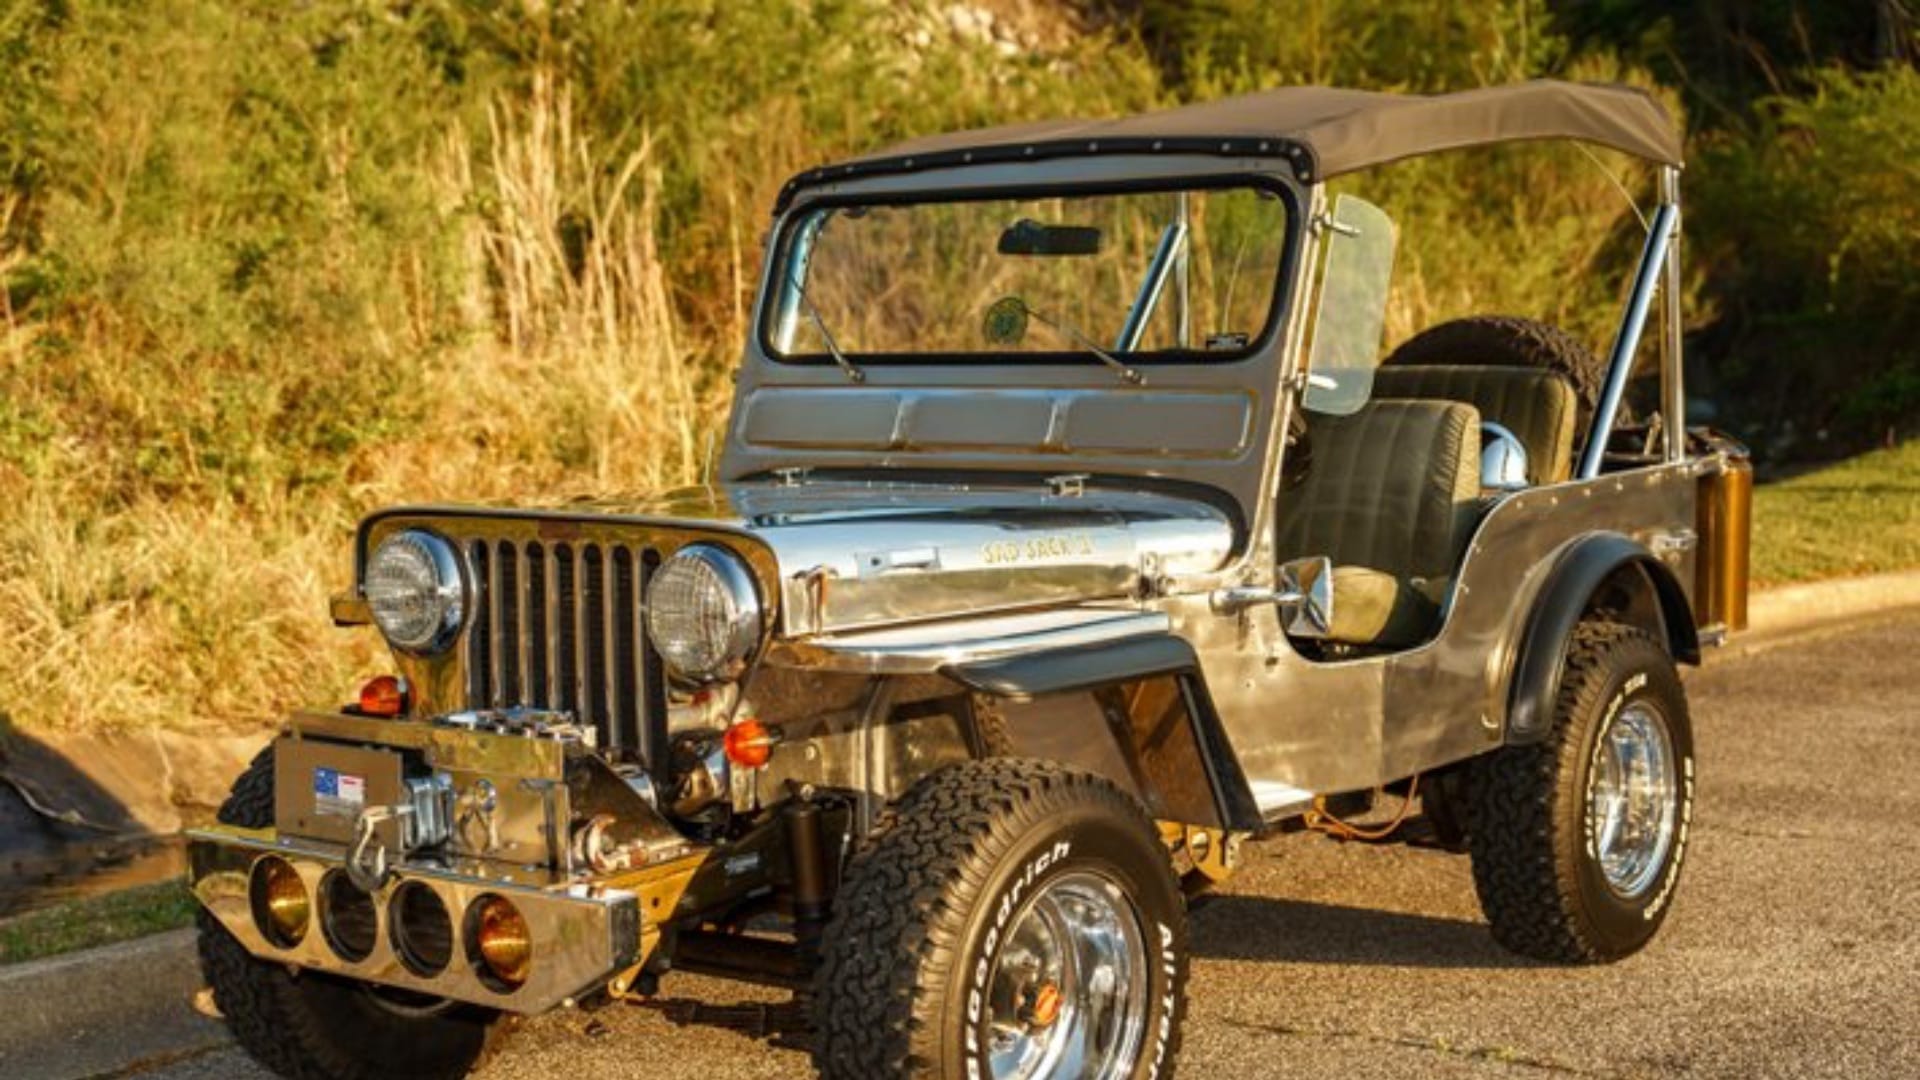 This Vic Hickey Built 1950 Jeep Willys Has Great History